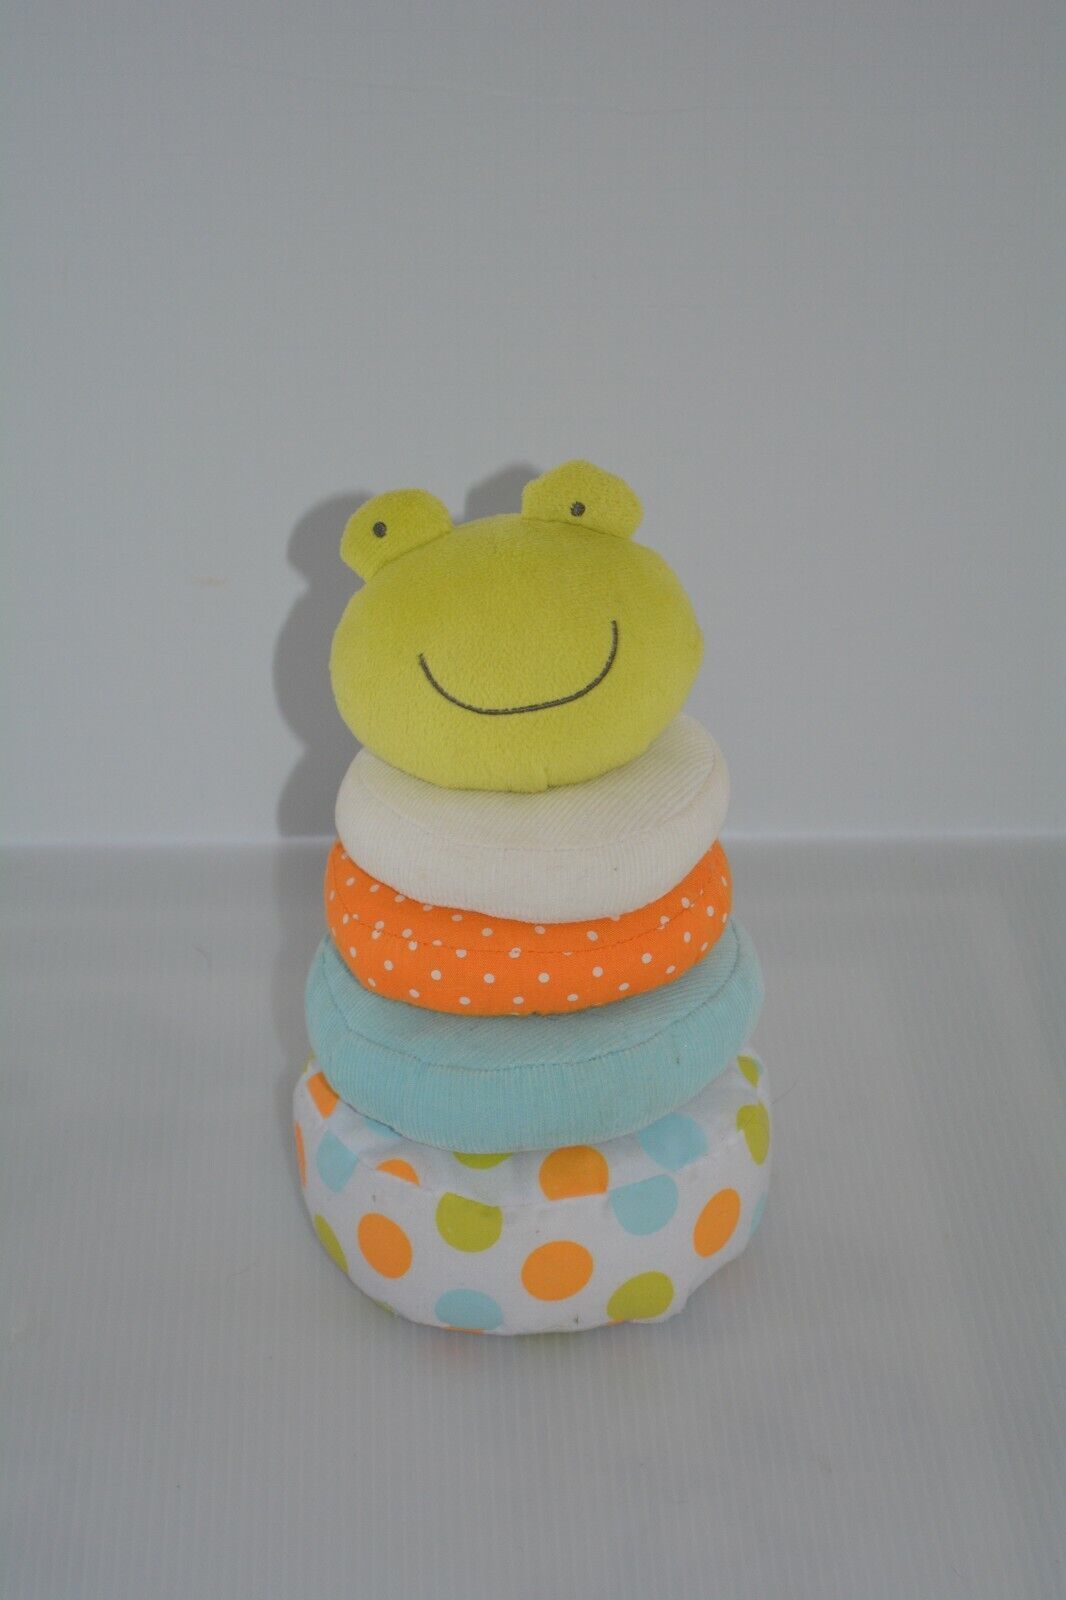 Carter's Plush Baby Soft Ring Stacker Frog Teether Toy Infant Learning HTF Rare  - $11.65